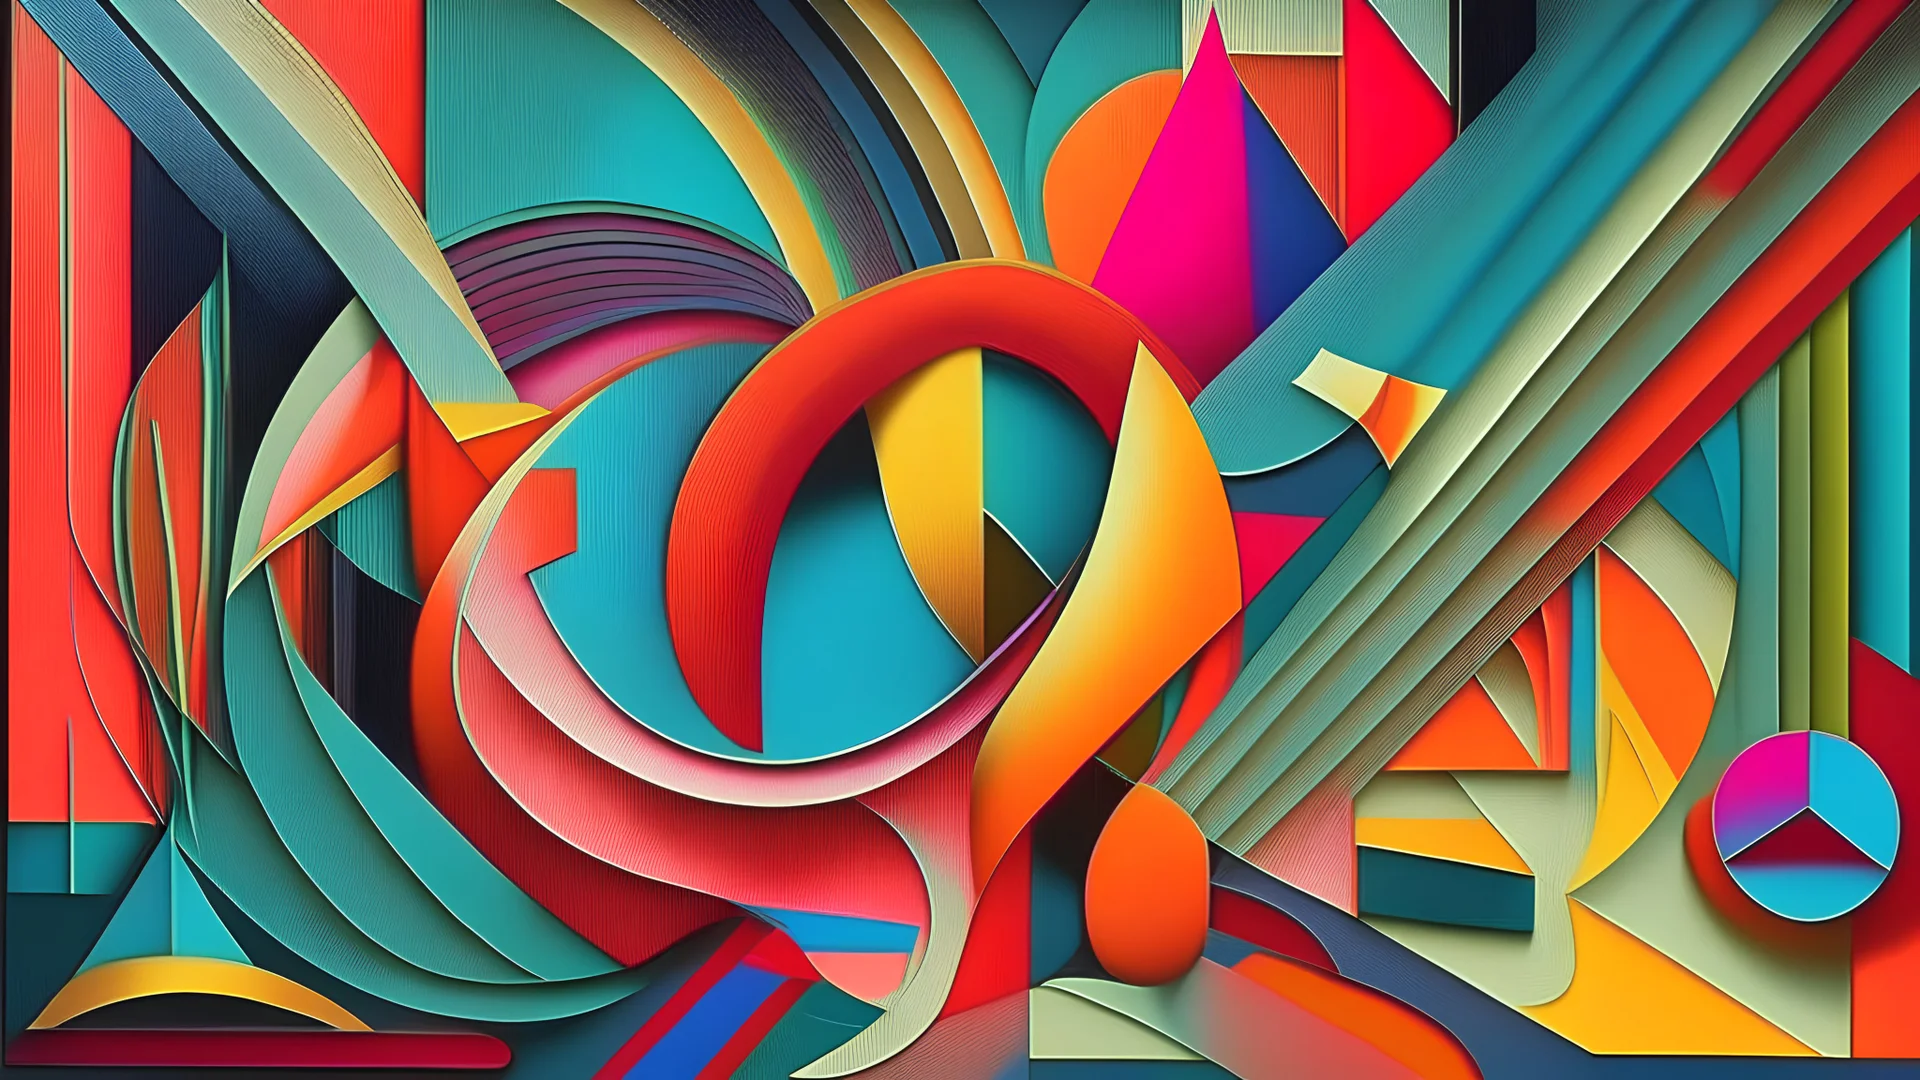 “Vibrant colors,” “Geometric shapes,” “Abstract patterns,” “Movement and flow,” “Texture and layers.” "art deco"